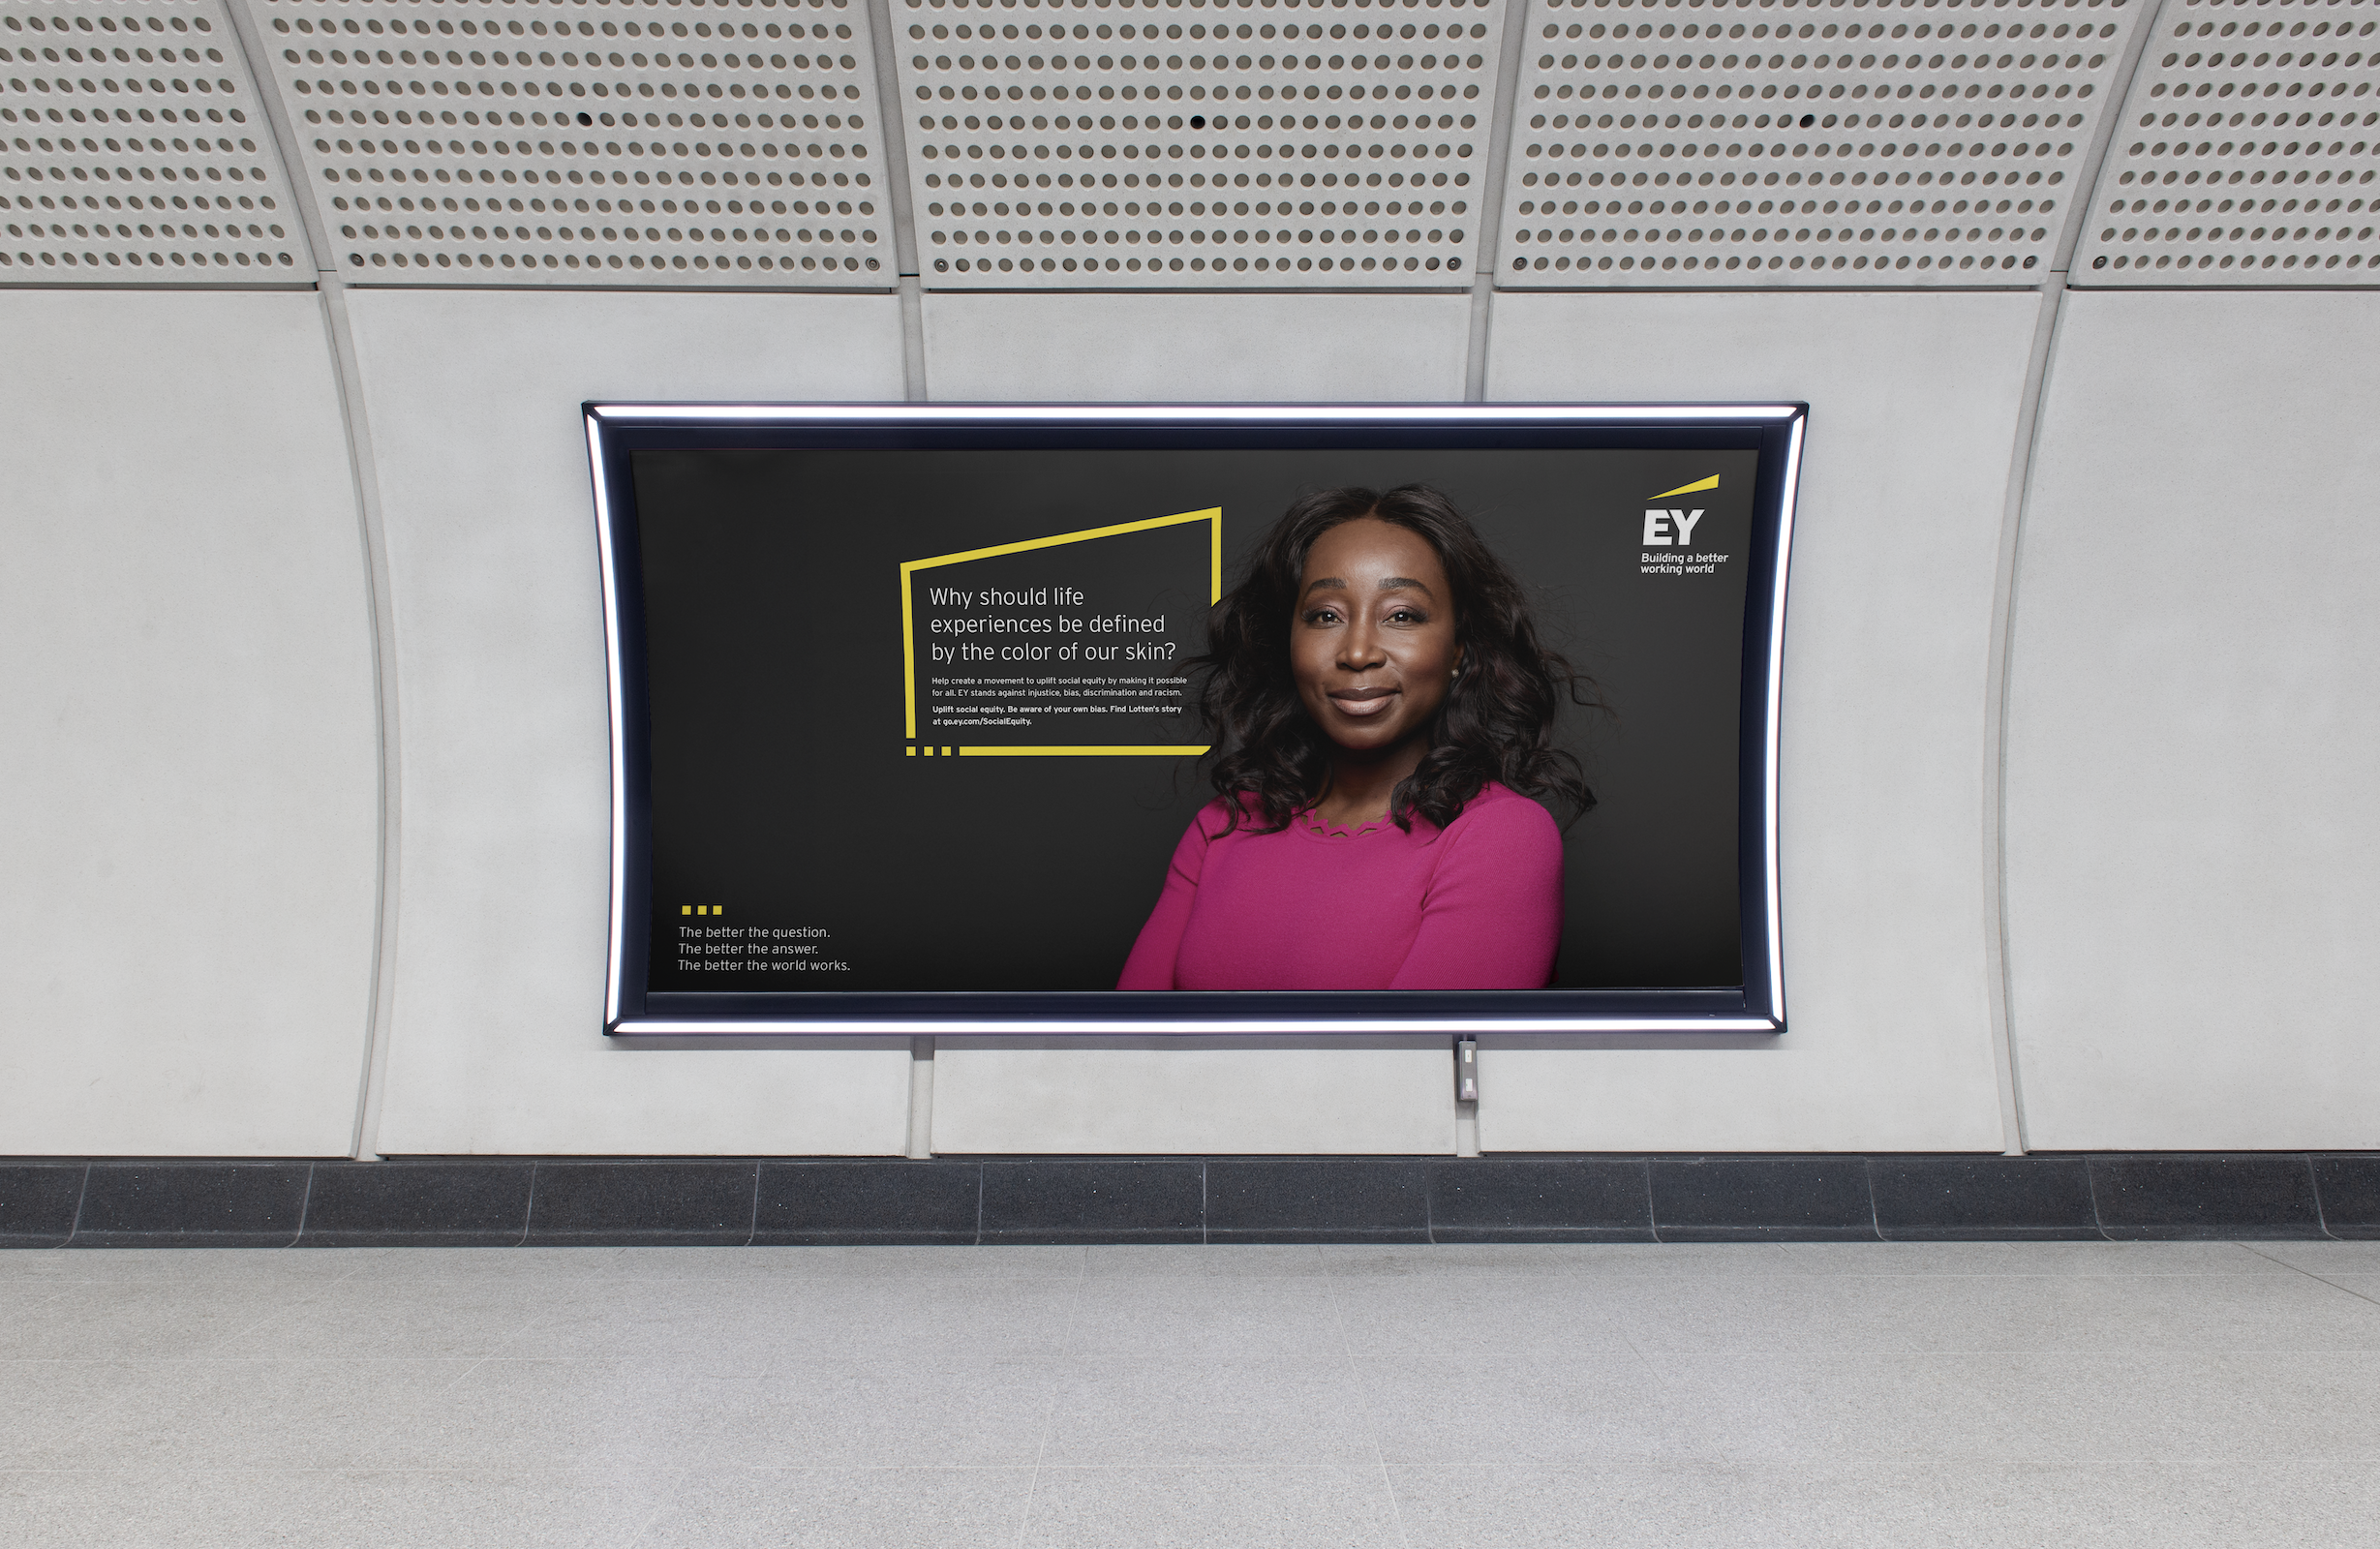 A tube tunnel billboard of EY poster with smiling black women and yellow box with text